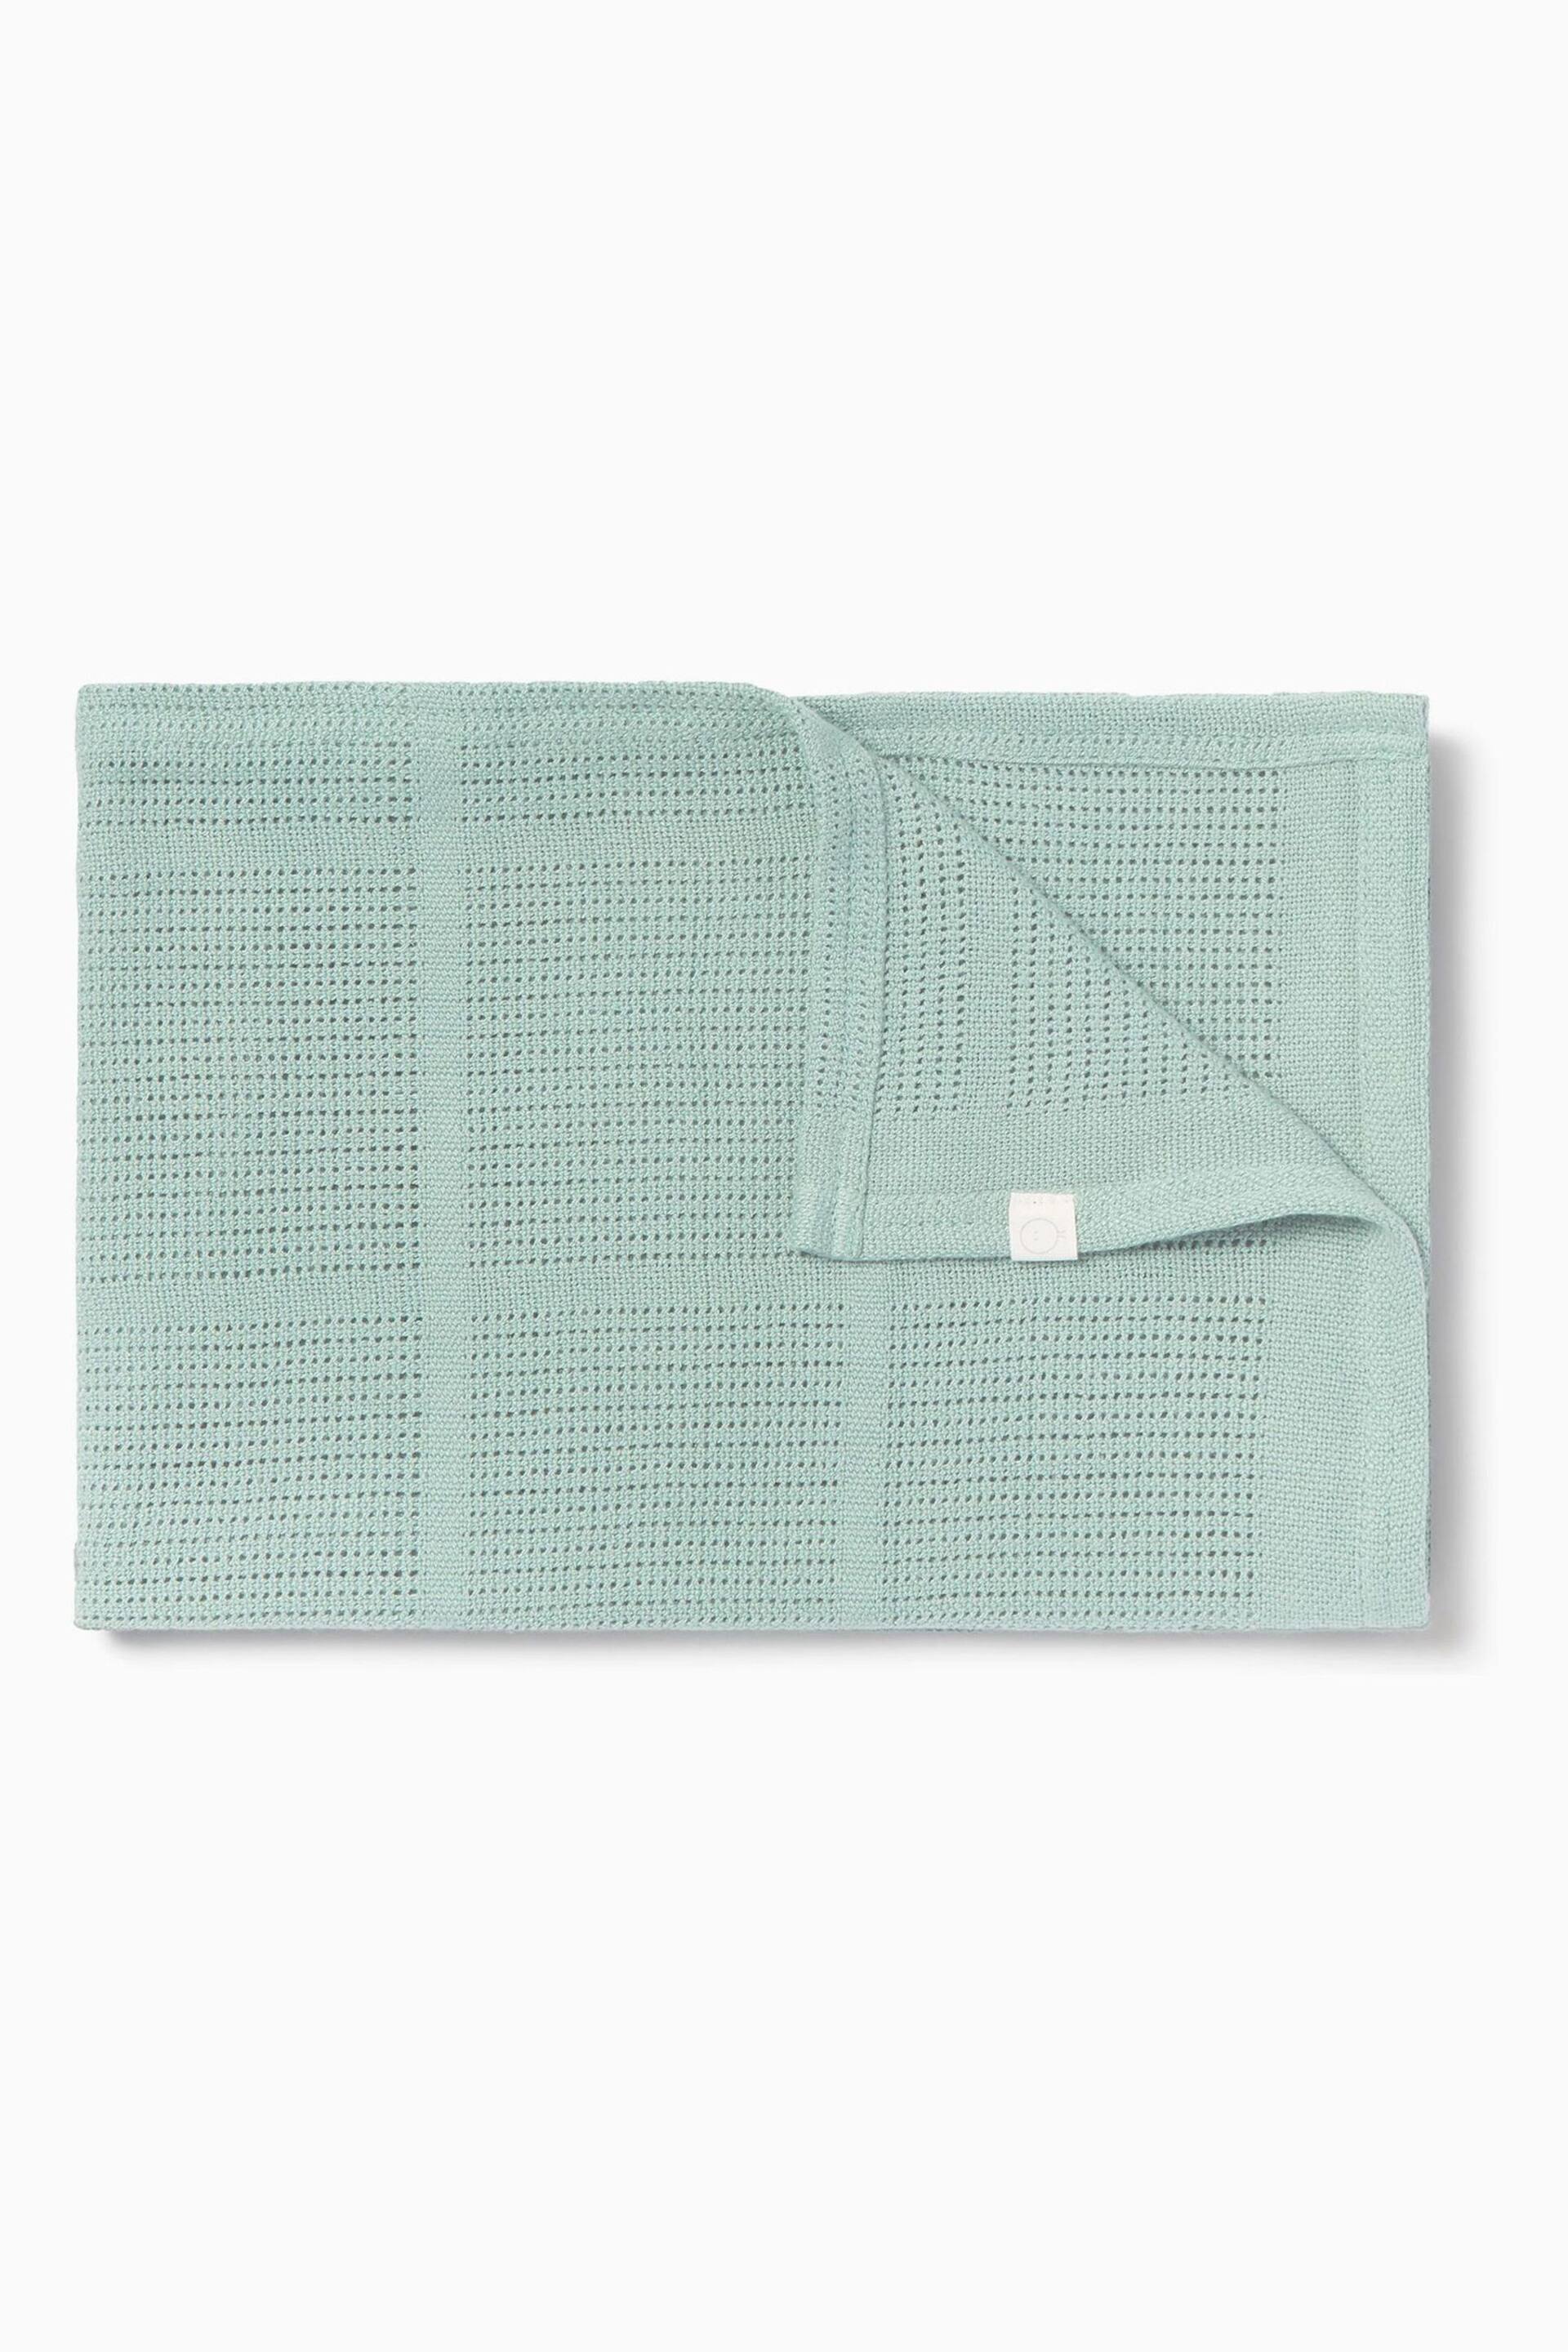 MORI Green Soft Cotton & Bamboo Cellular Baby Blanket - Image 1 of 5